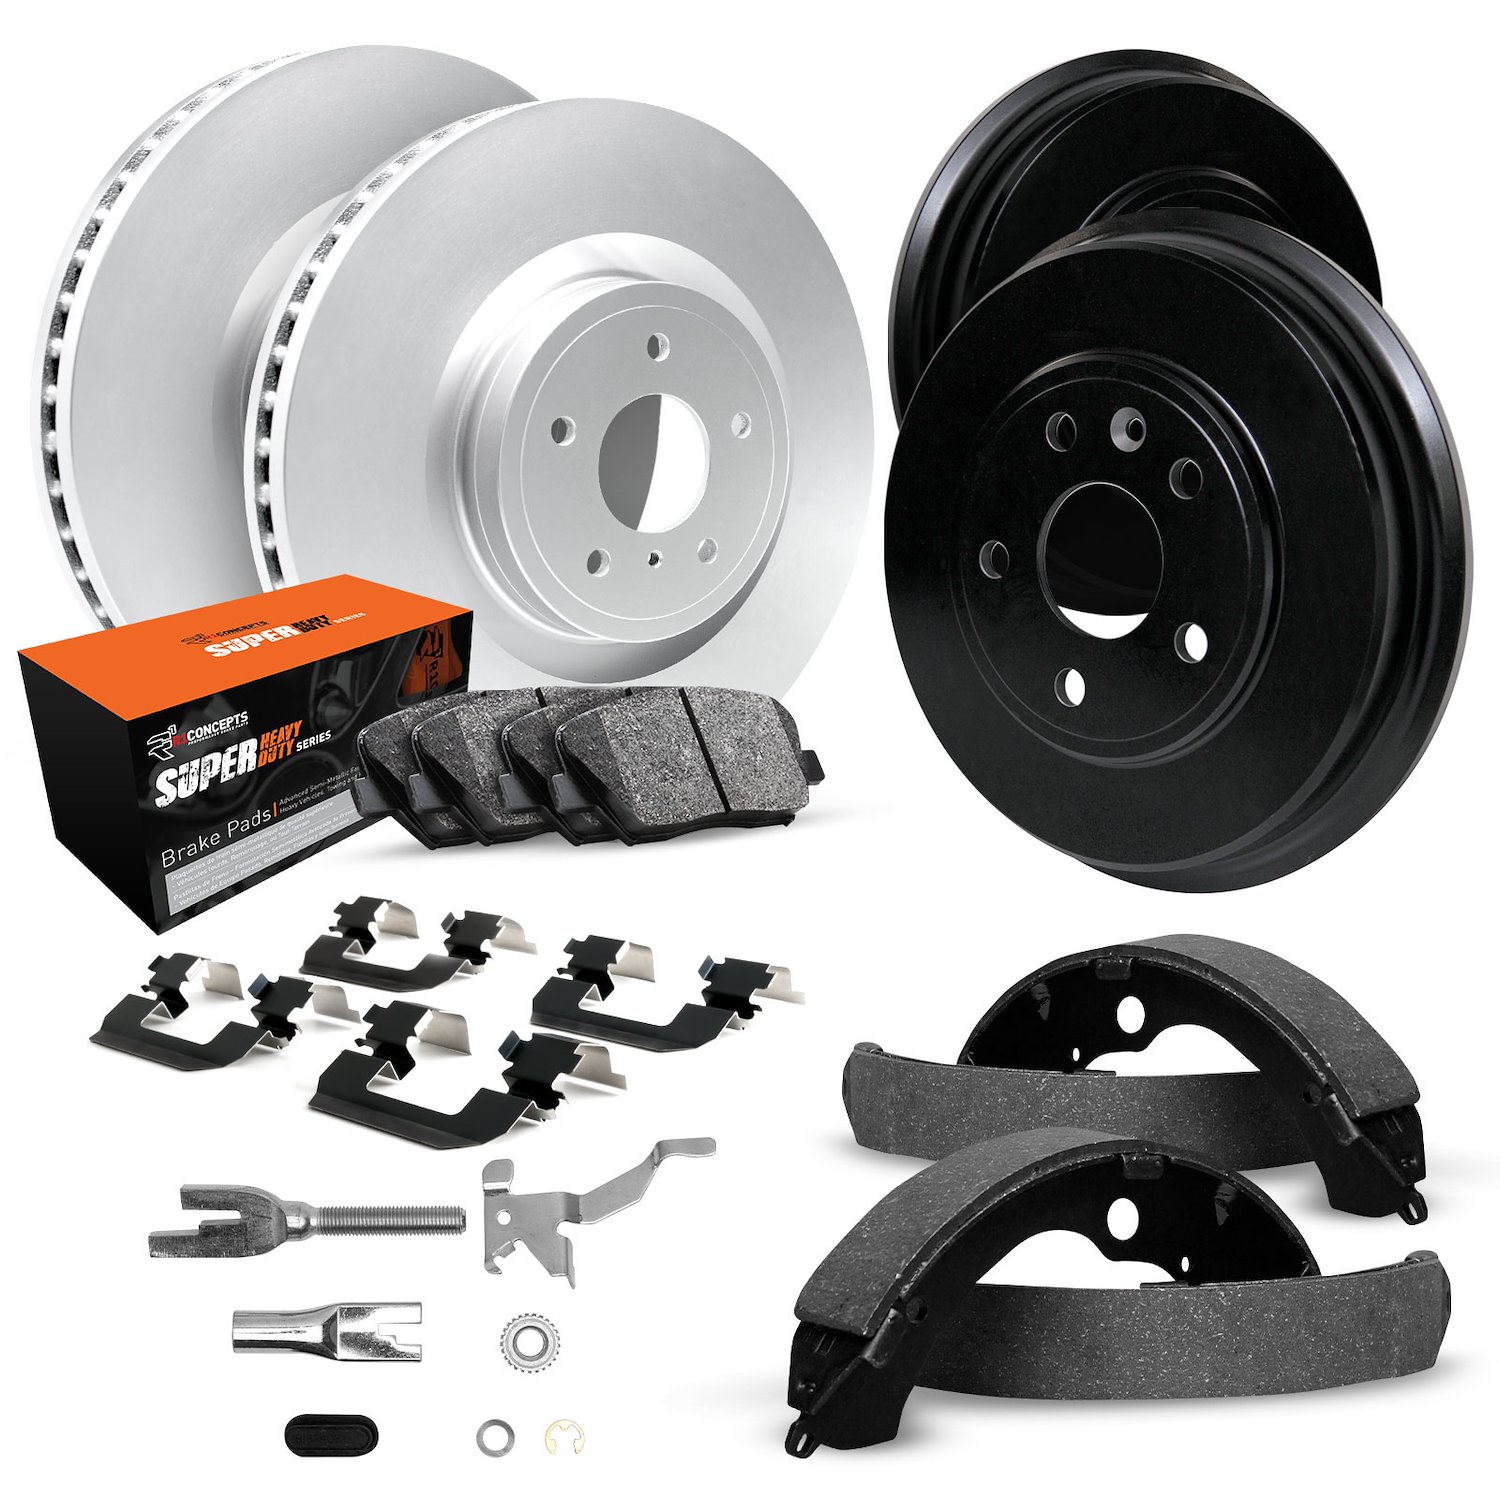 GEO-Carbon Brake Rotor & Drum Set w/Super-Duty Pads, Shoes, Hardware/Adjusters, 1992-2002 GM, Position: Front & Rear